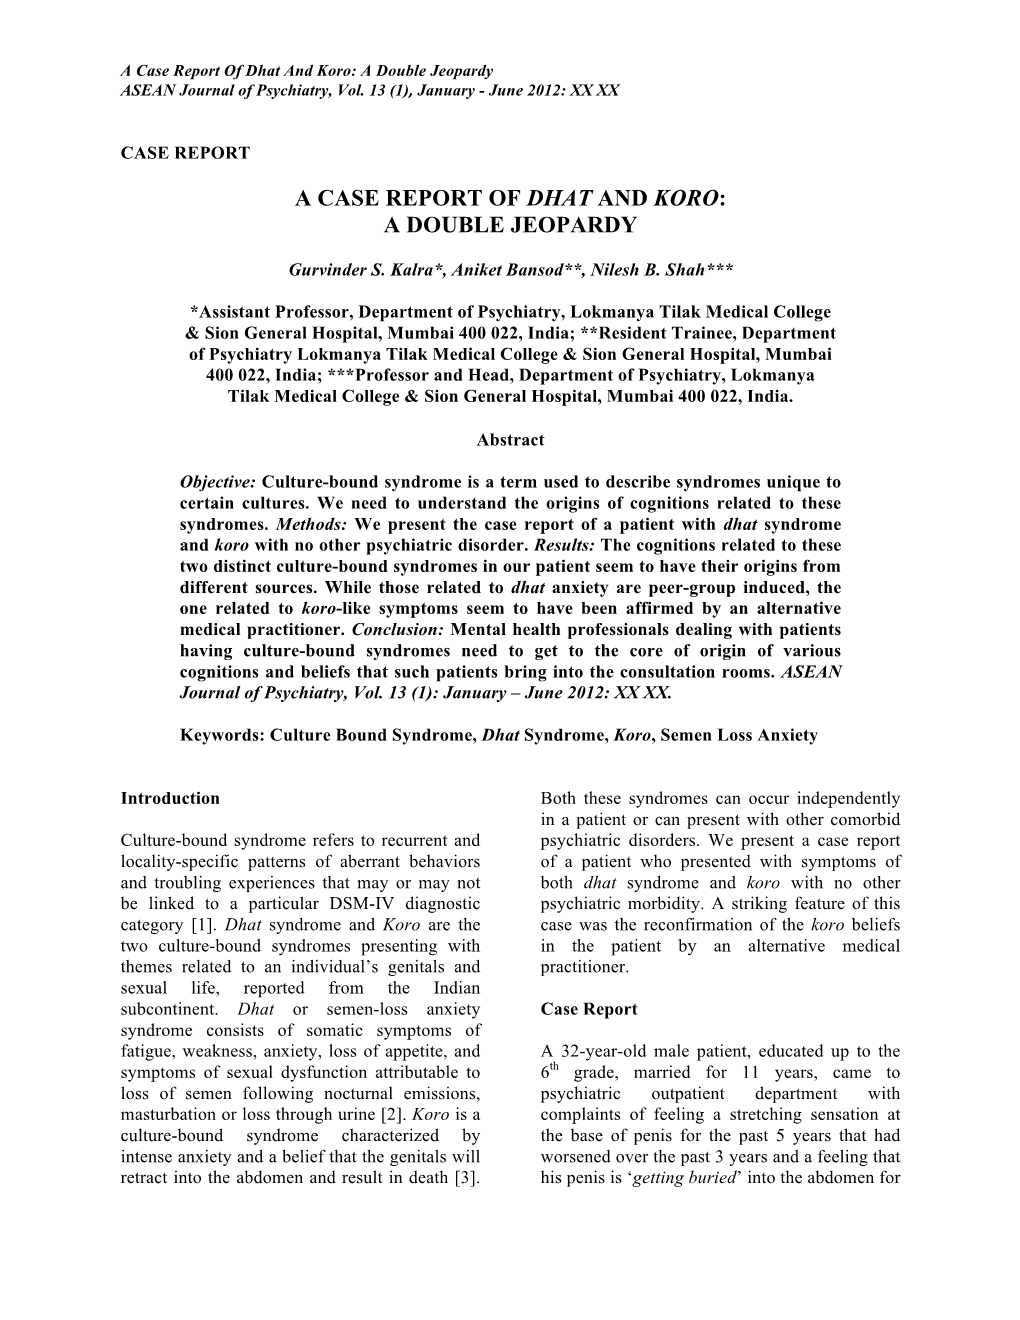 A Case Report of Dhat and Koro: a Double Jeopardy ASEAN Journal of Psychiatry, Vol